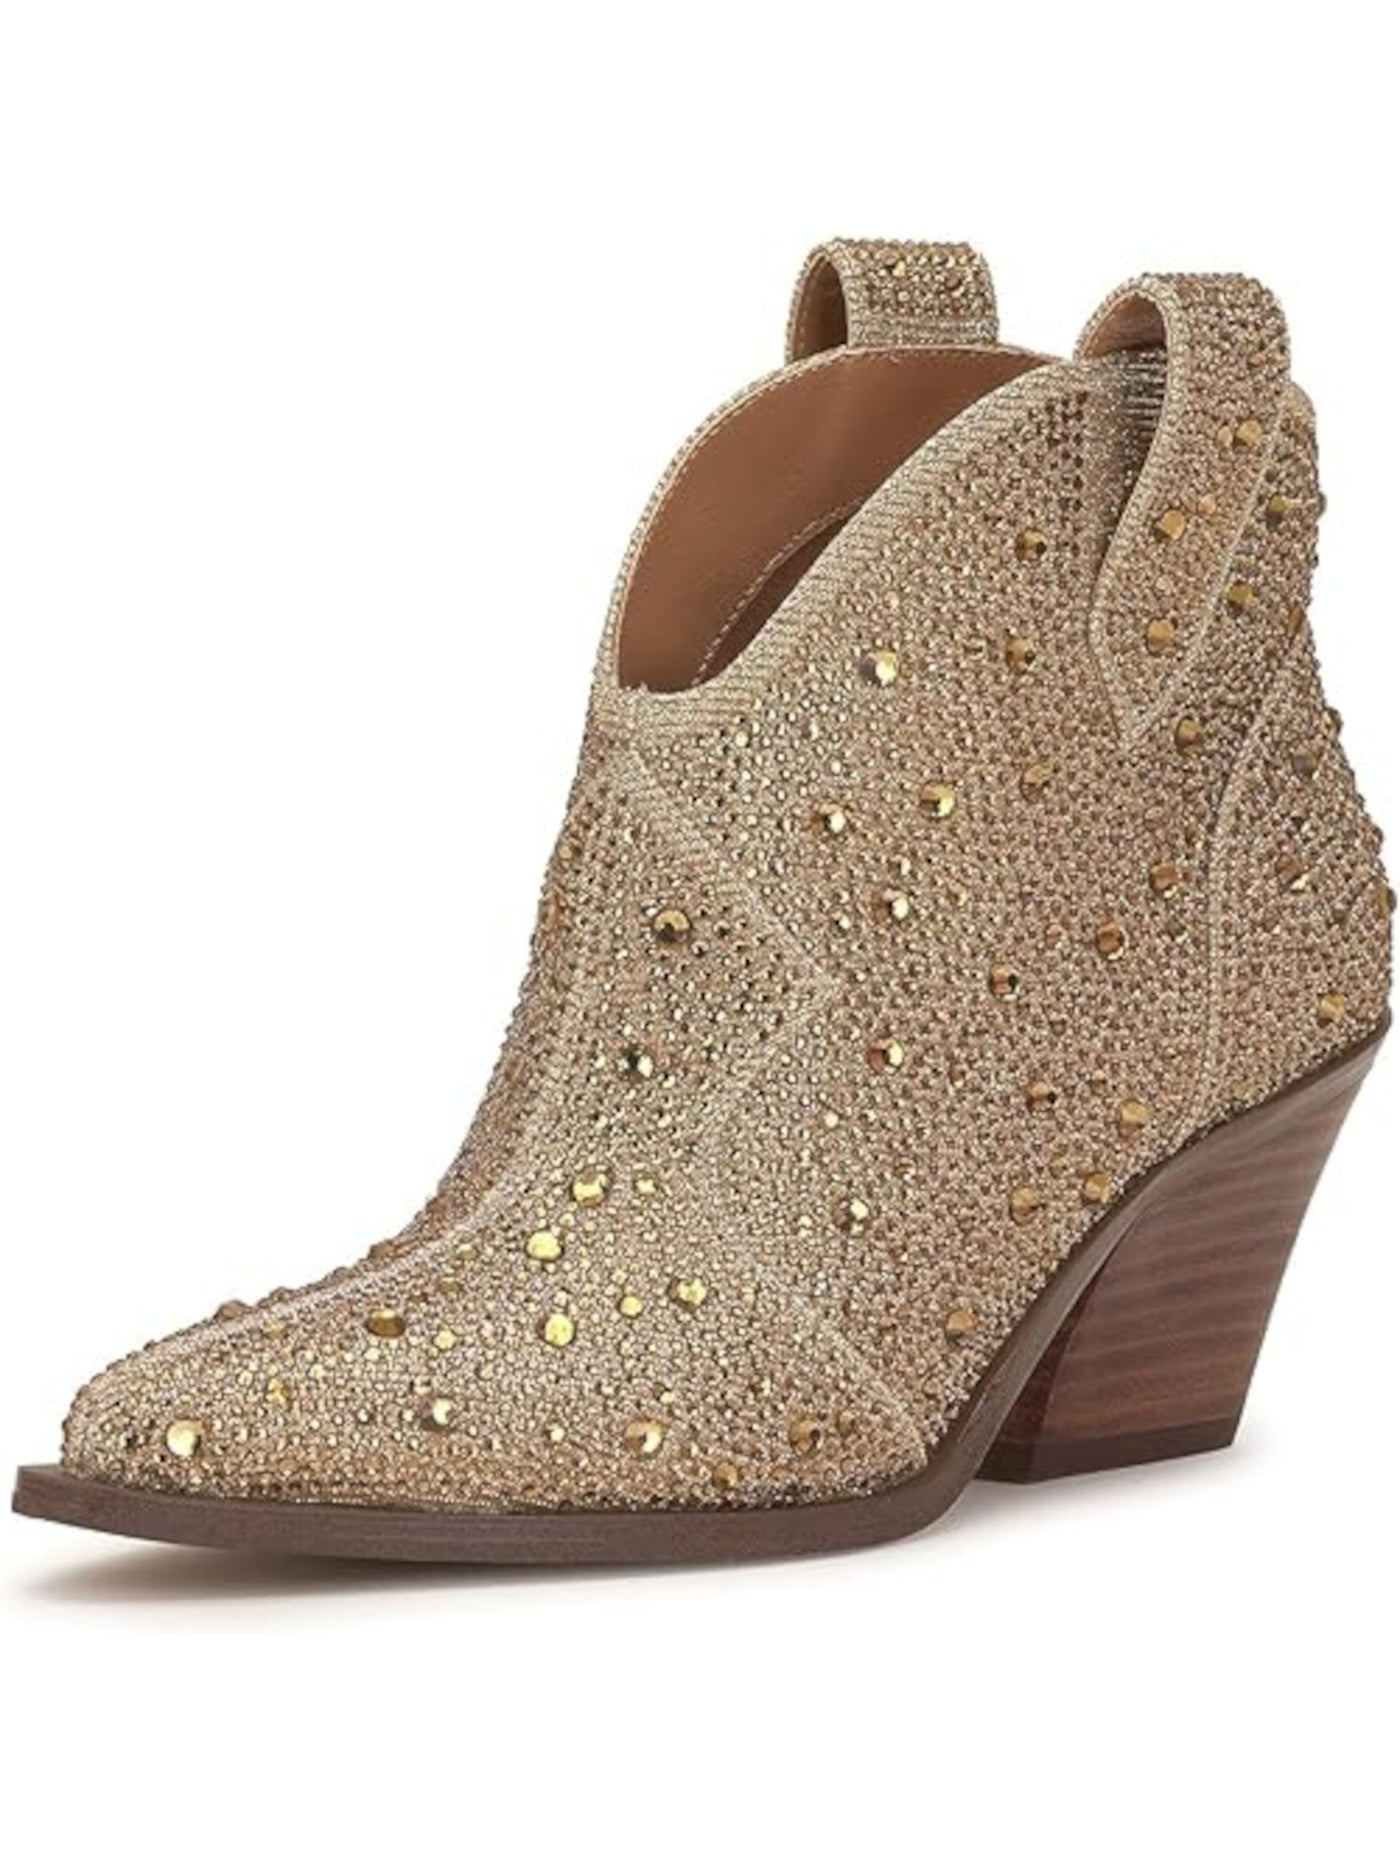 JESSICA SIMPSON Womens Gold Front Notch Embellished Zadie Pointed Toe Stacked Heel Slip On Western Boot 5.5 M